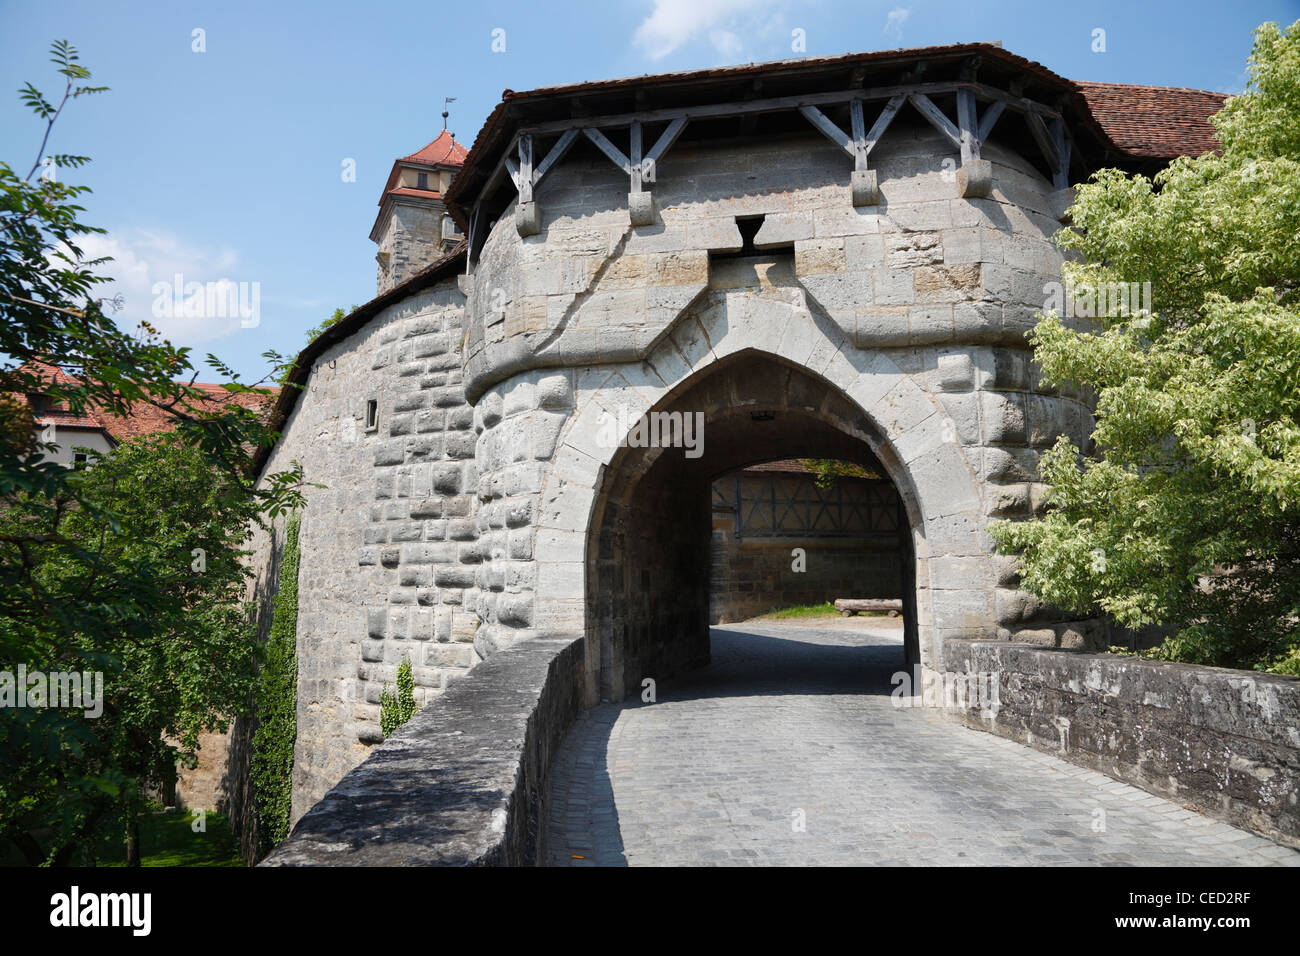 The Spital Bastion - Spitalbastei -  forms the southern end of the medieval ring wall around Rothenburg ob der Tauber, Germany Stock Photo